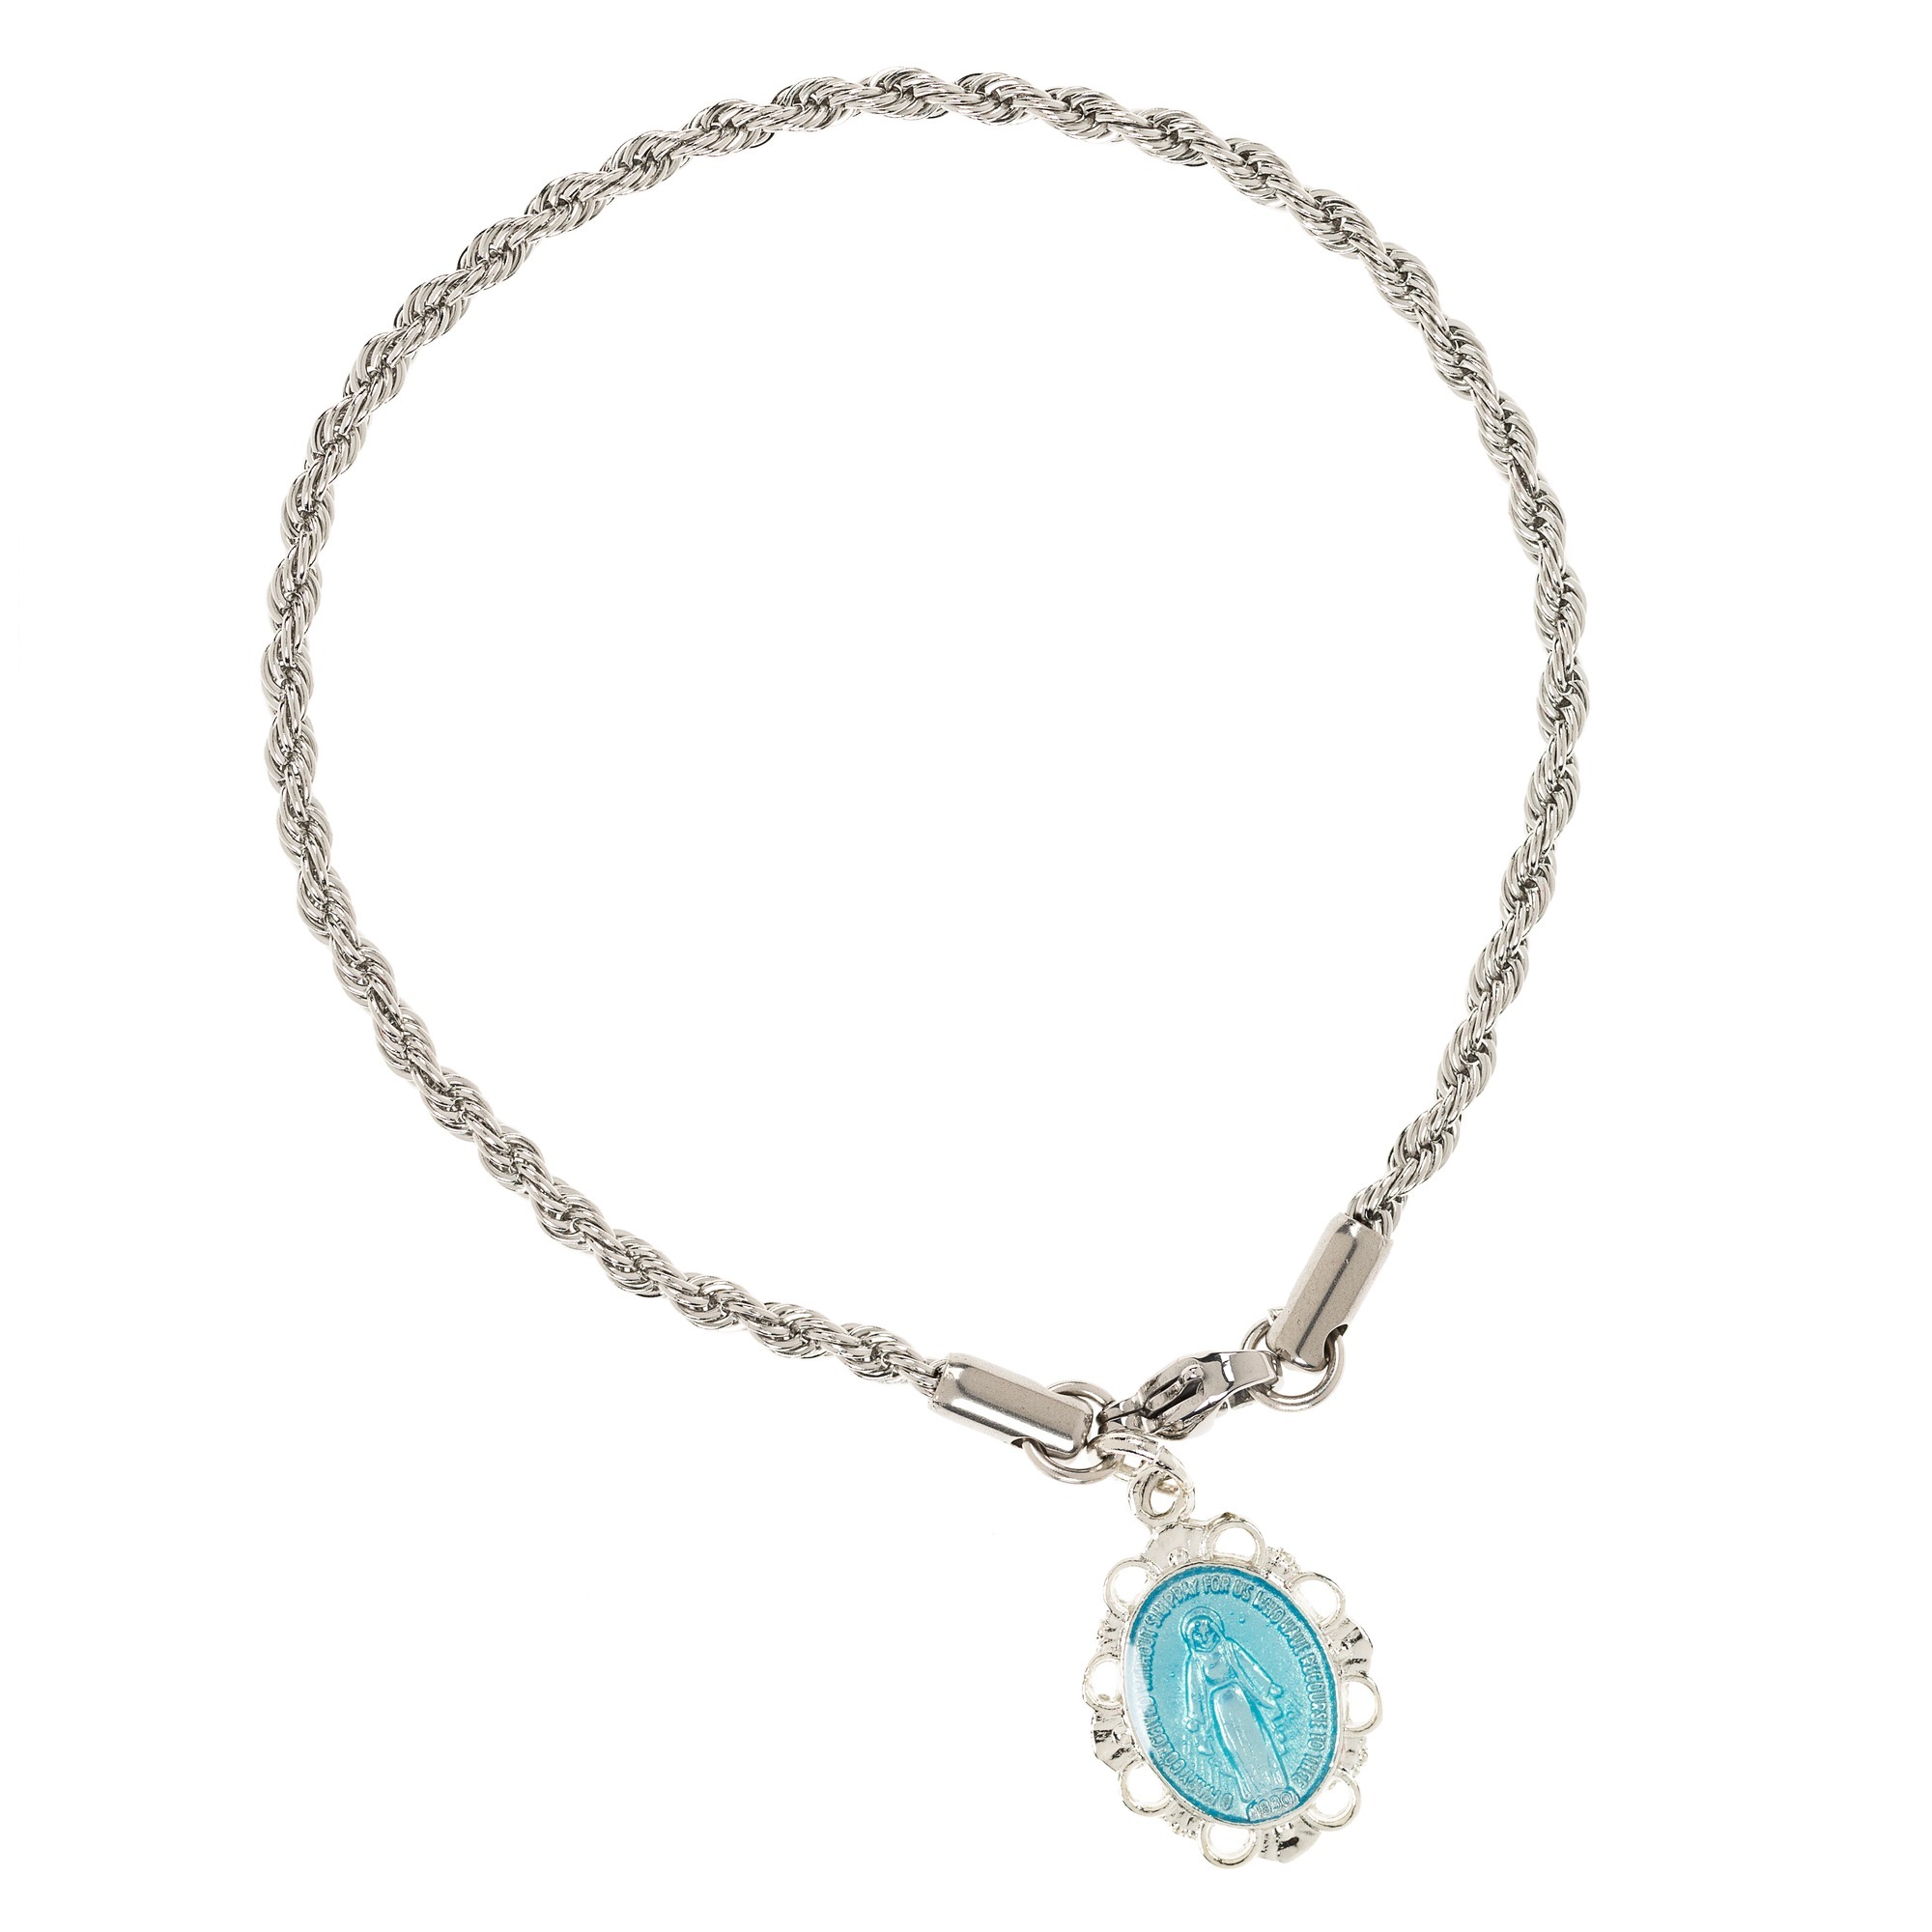 Miraculous Medal Rope Chain Bracelet | The Catholic Company®